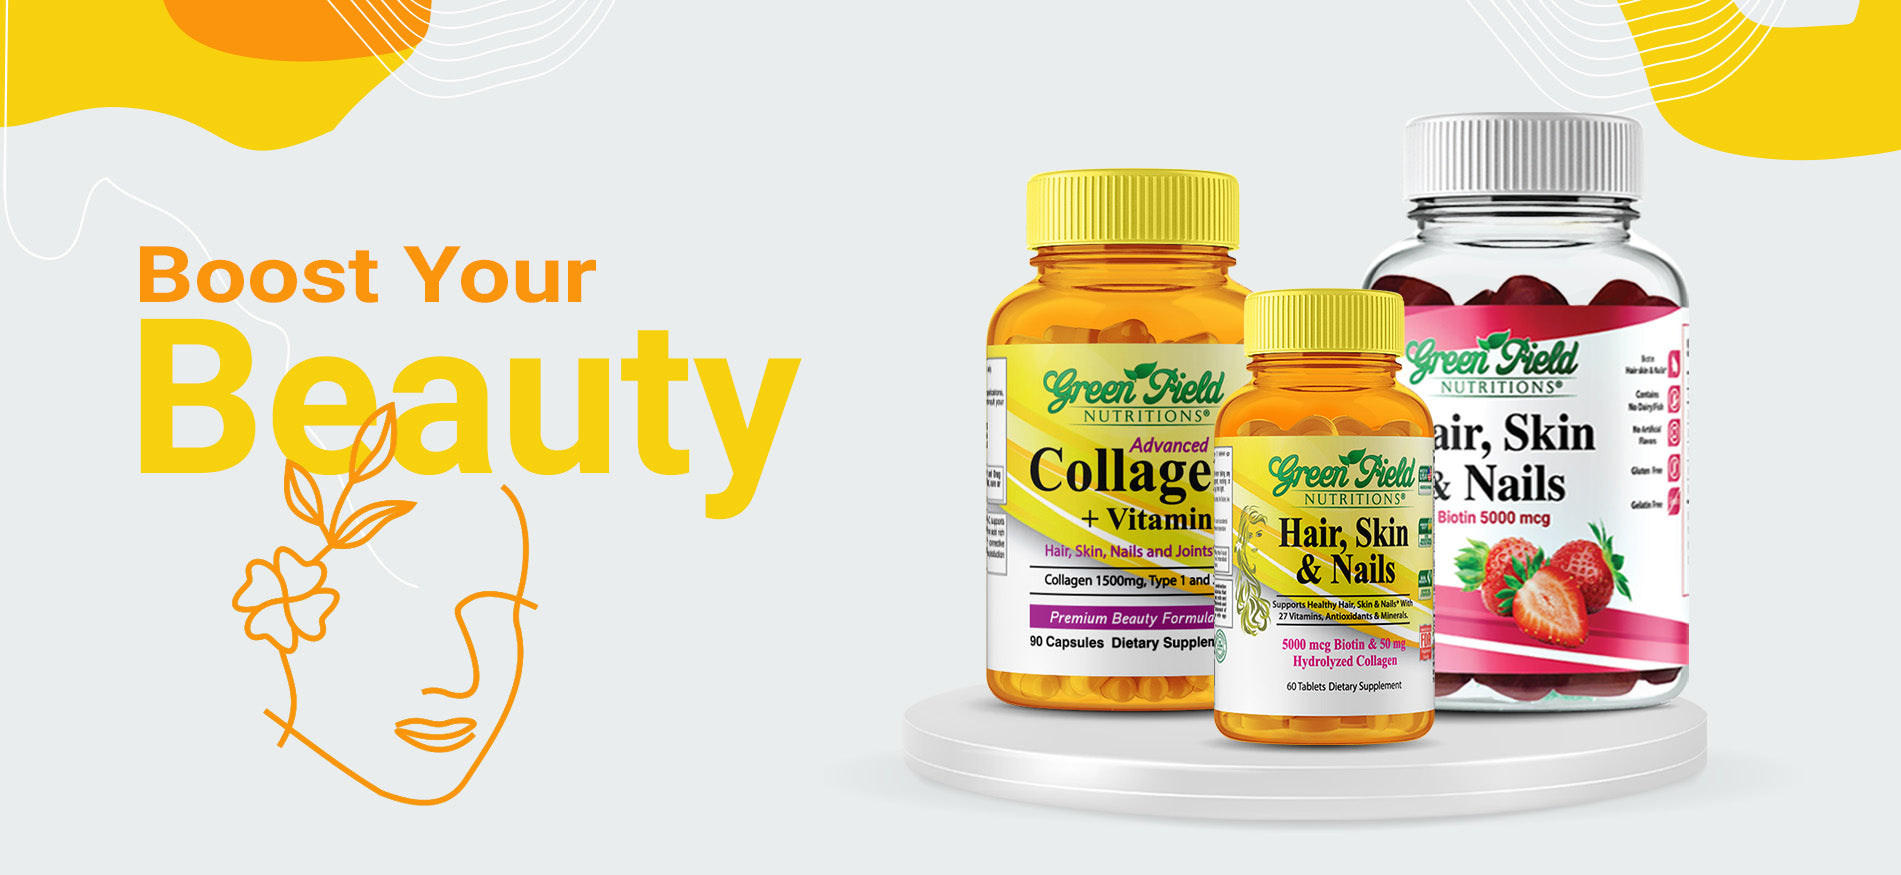 Halal Hair, Skin, and Nails contains Halal collagen, Biotin, and Halal Multivitamin 